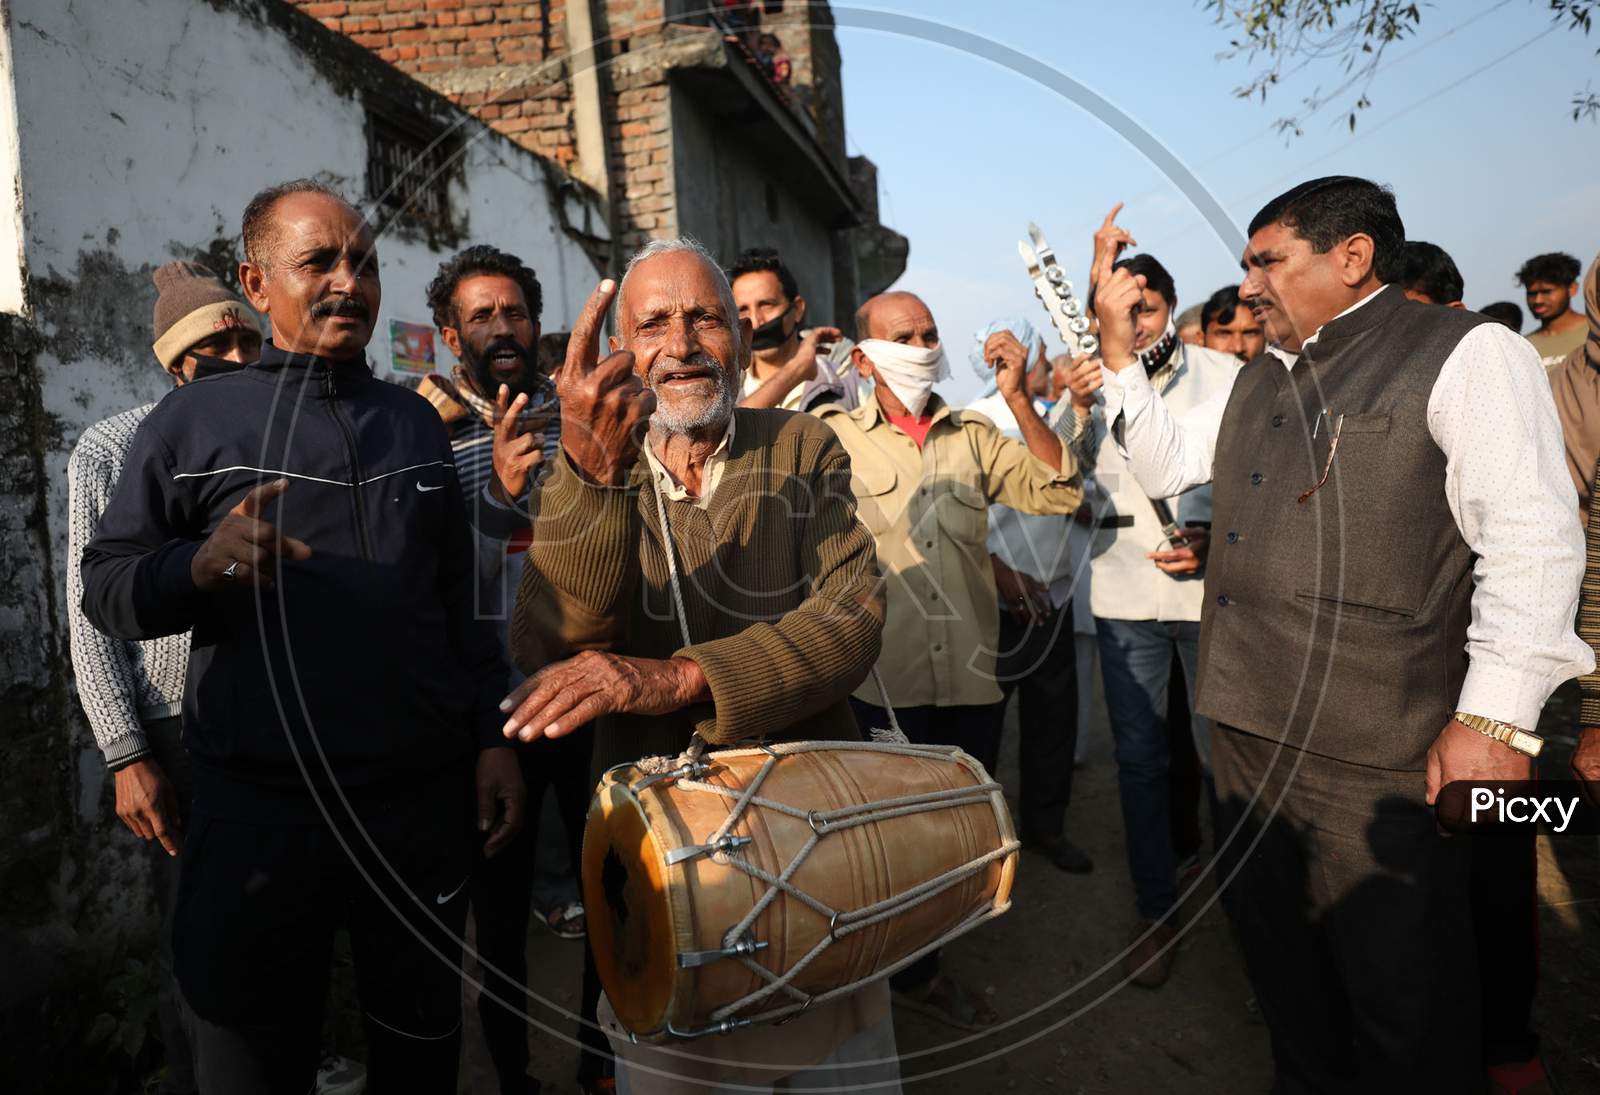 West pakstani refugee celebrate after casting vote during the Third phase of District Development Council (DDC) election at Jaffar chak in Marh near International border in Jammu,4 Dec,2020.